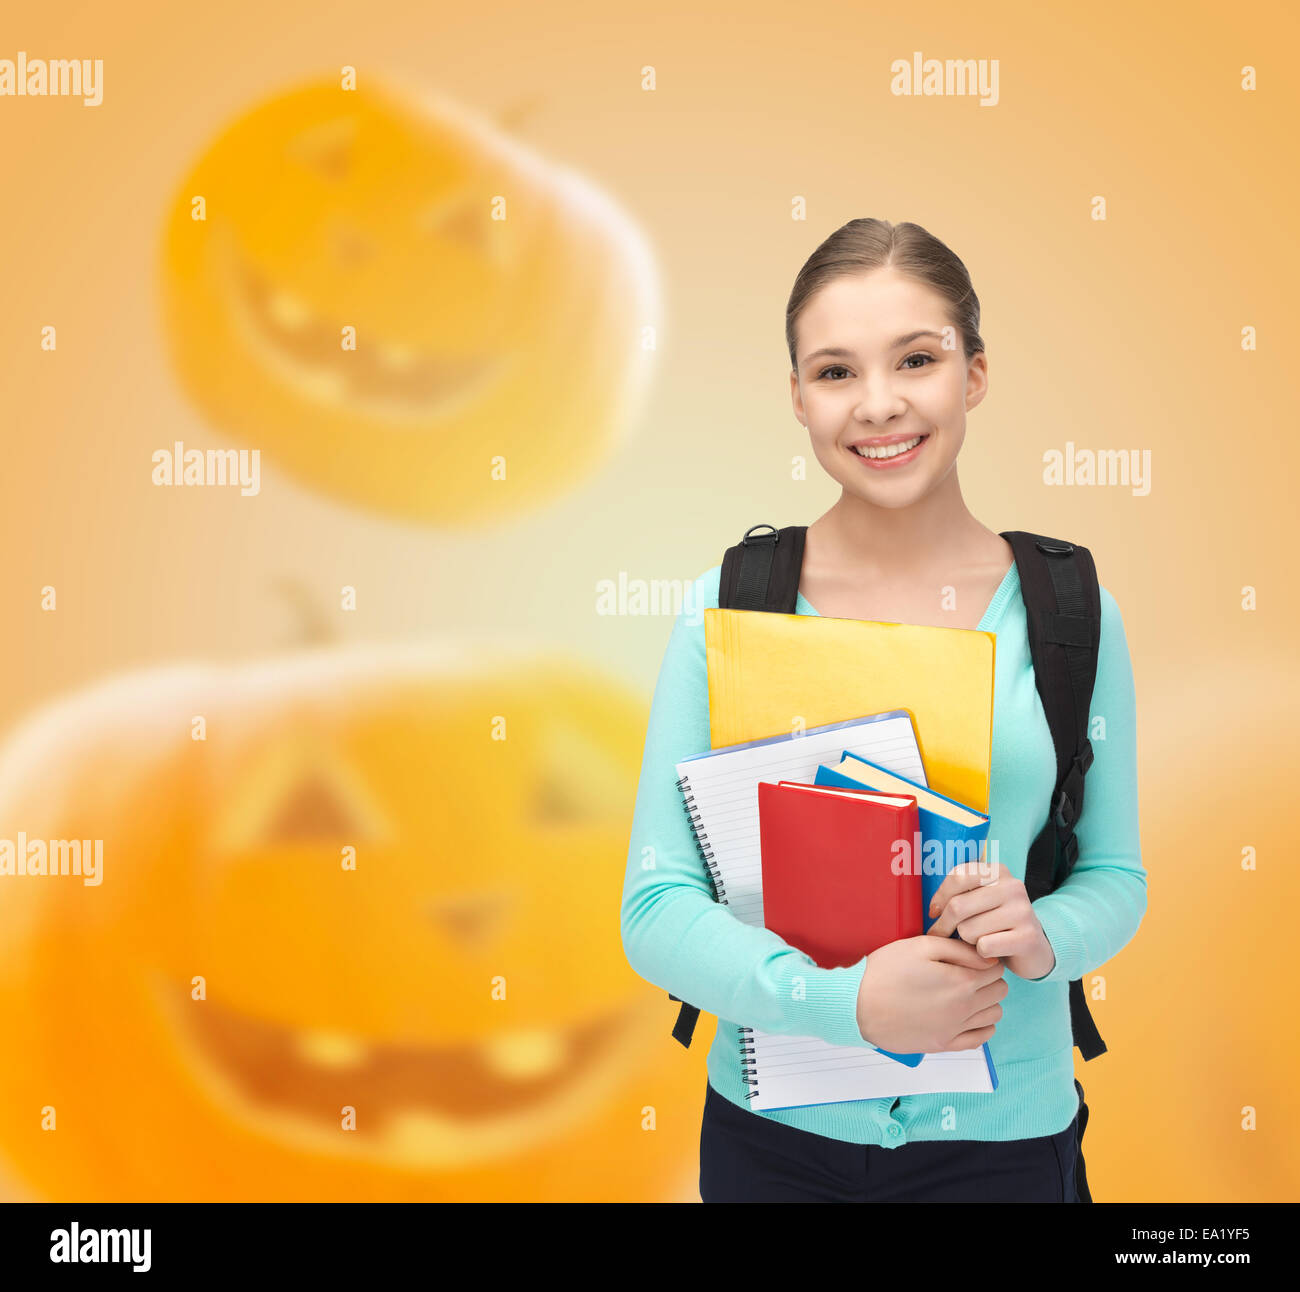 smiling student girl with books and backpack Stock Photo